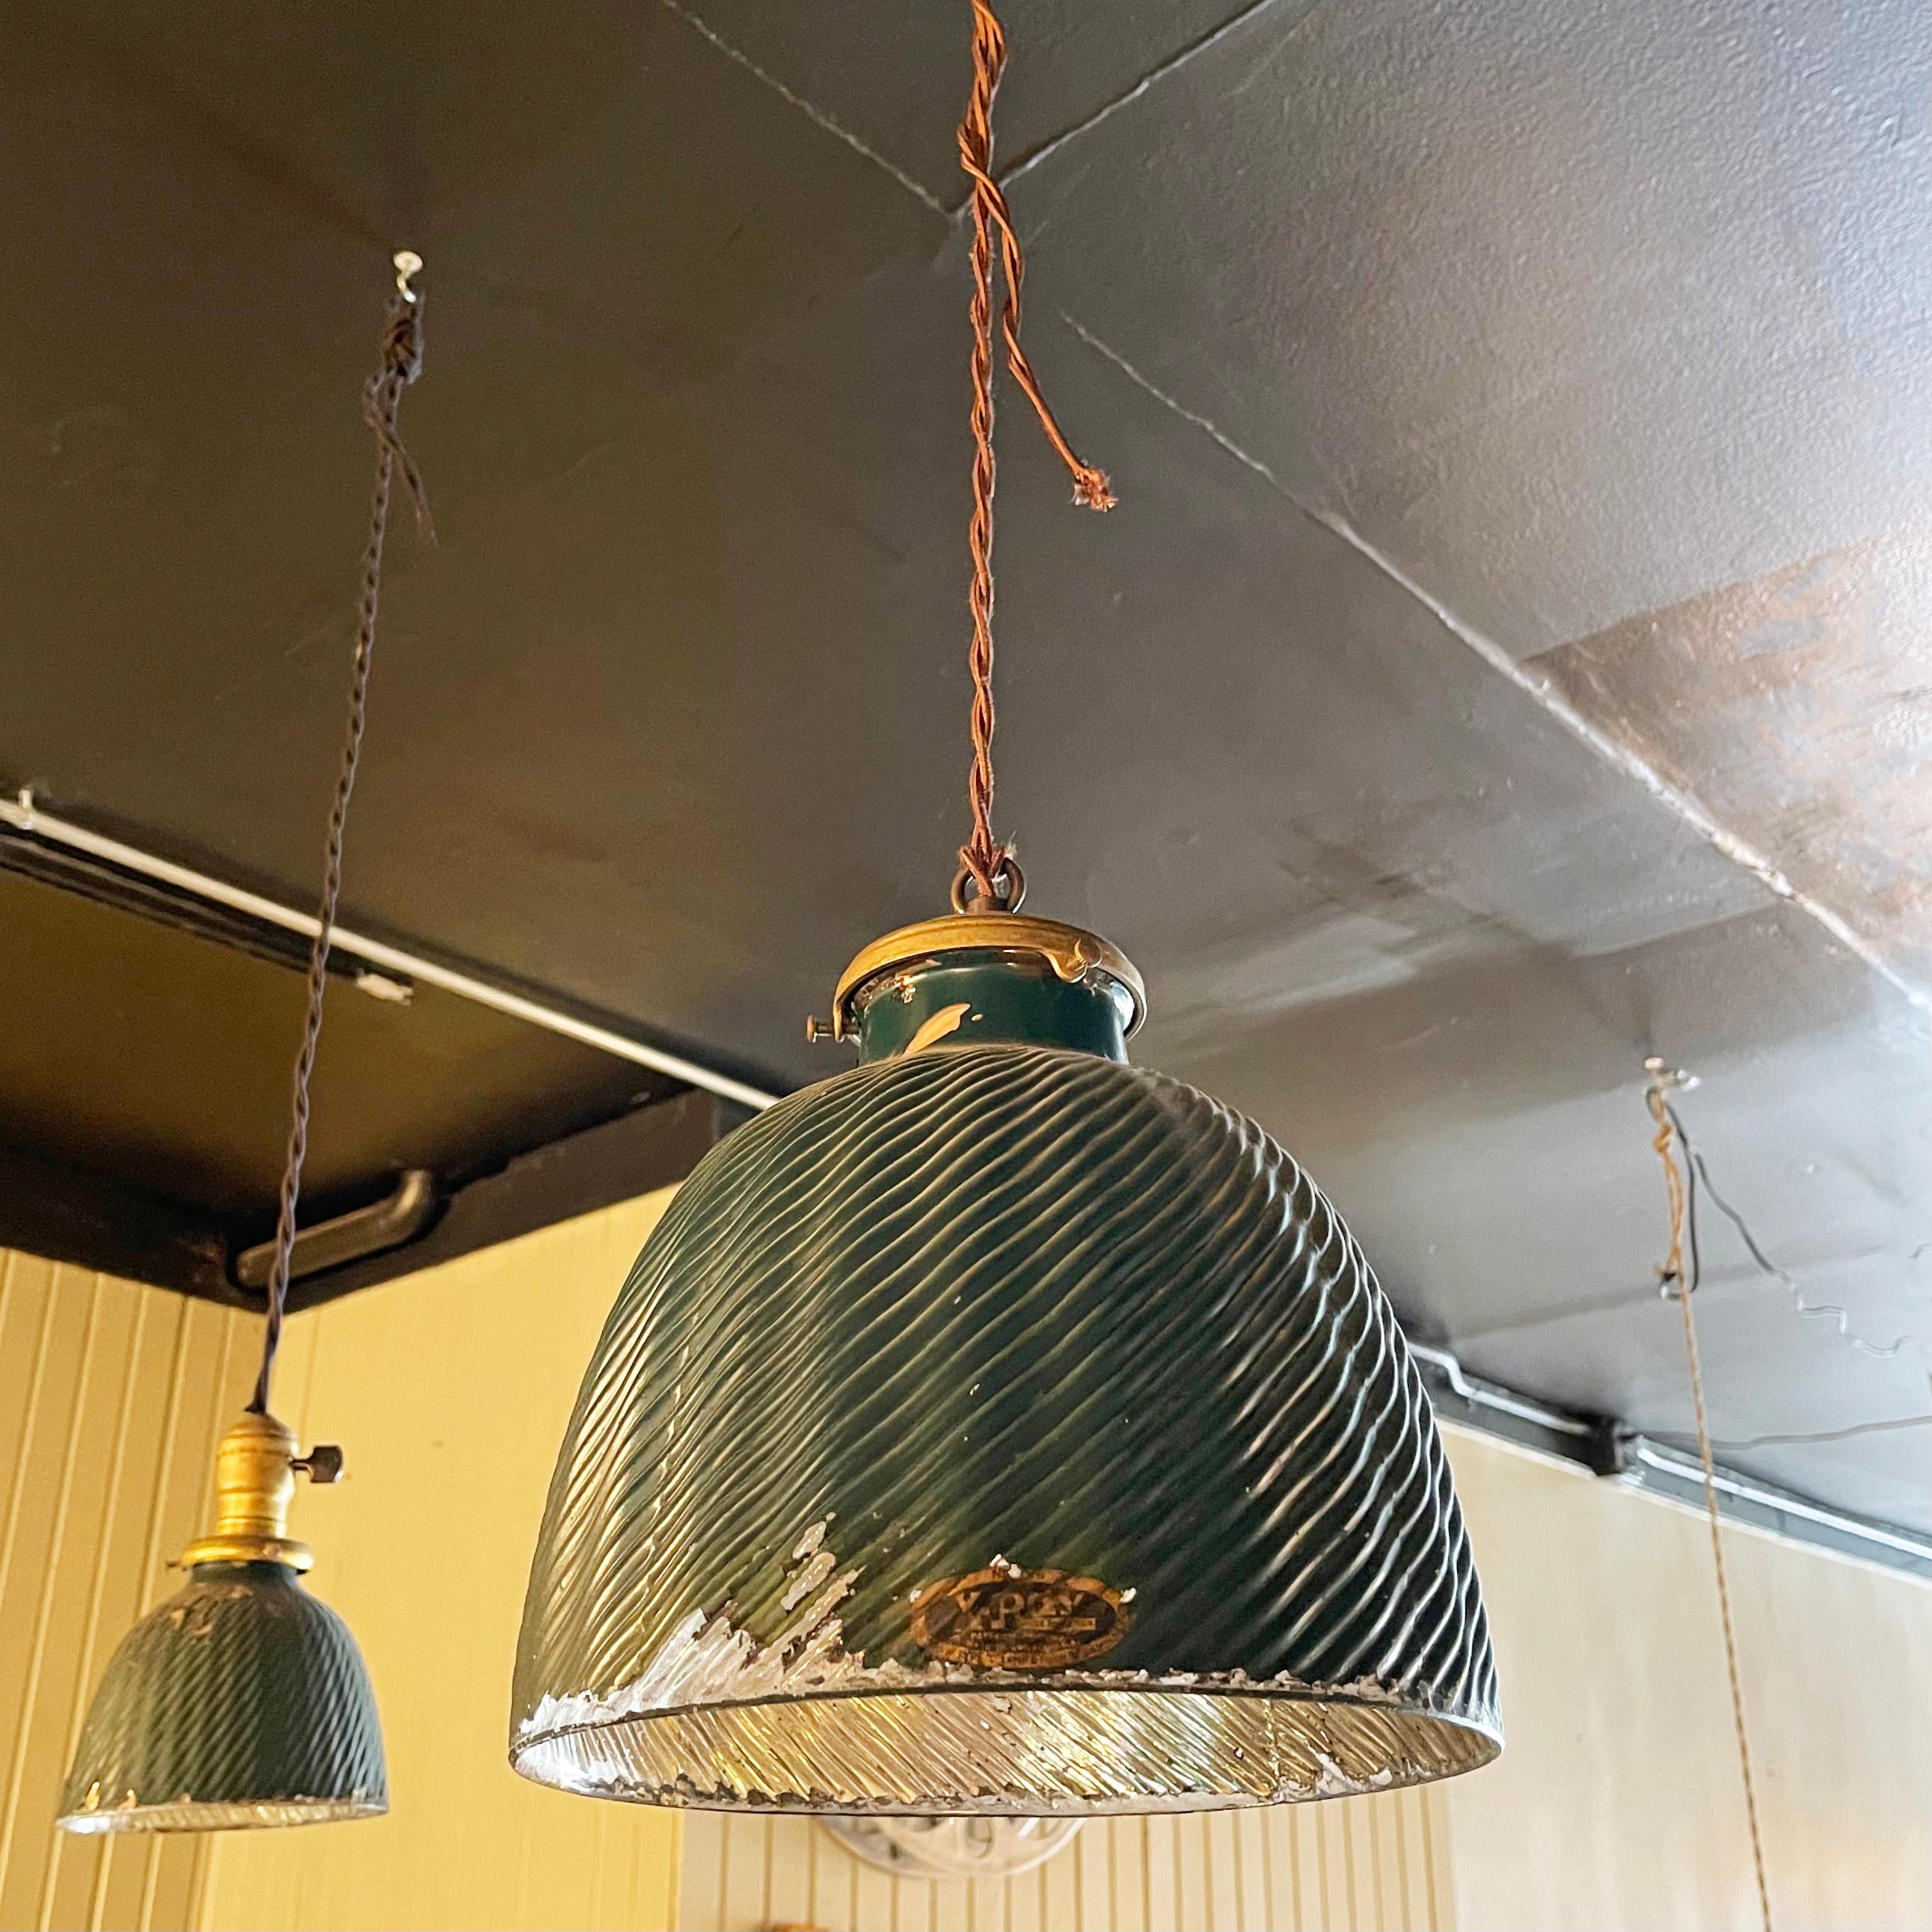 Antique, industrial pendant light features a beautifully patinated, X-Ray mercury glass shade with painted green exterior and reflective silver interior with brass fitter. The lamp is newly wired with 36 inches of braided brown cloth cord to accept